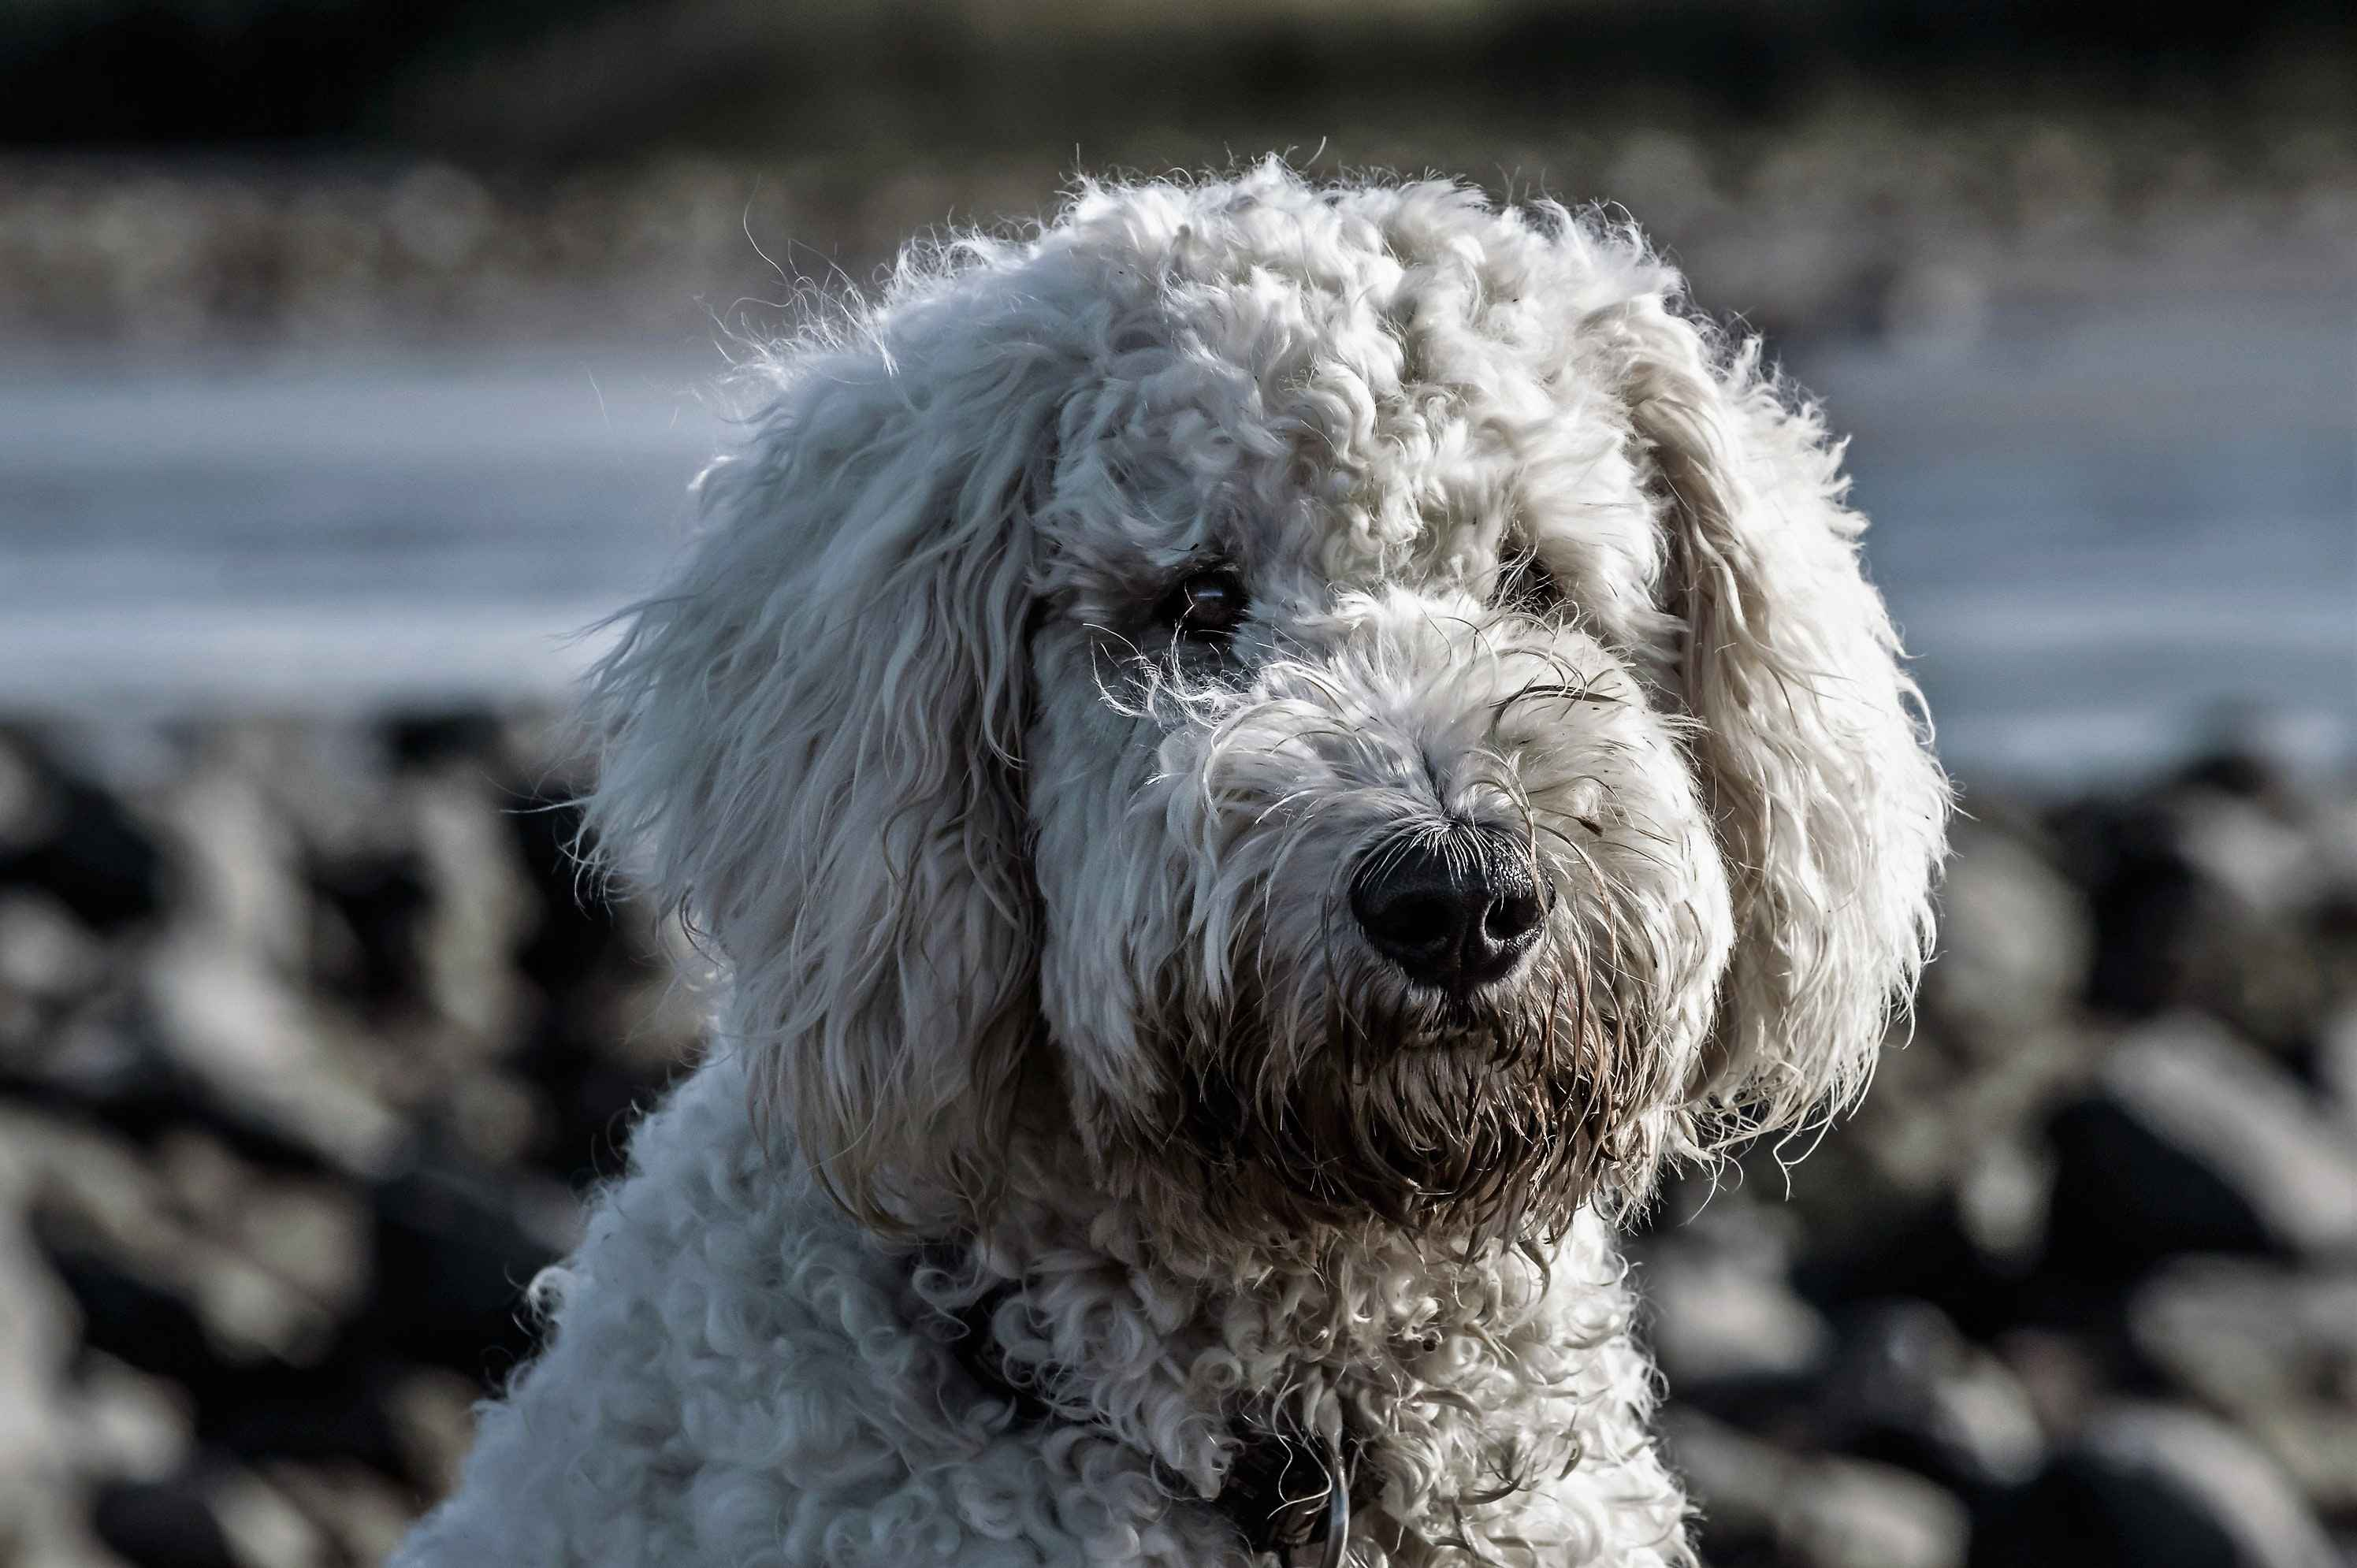 What are some important safety precautions to take when bringing a Poodle puppy home?